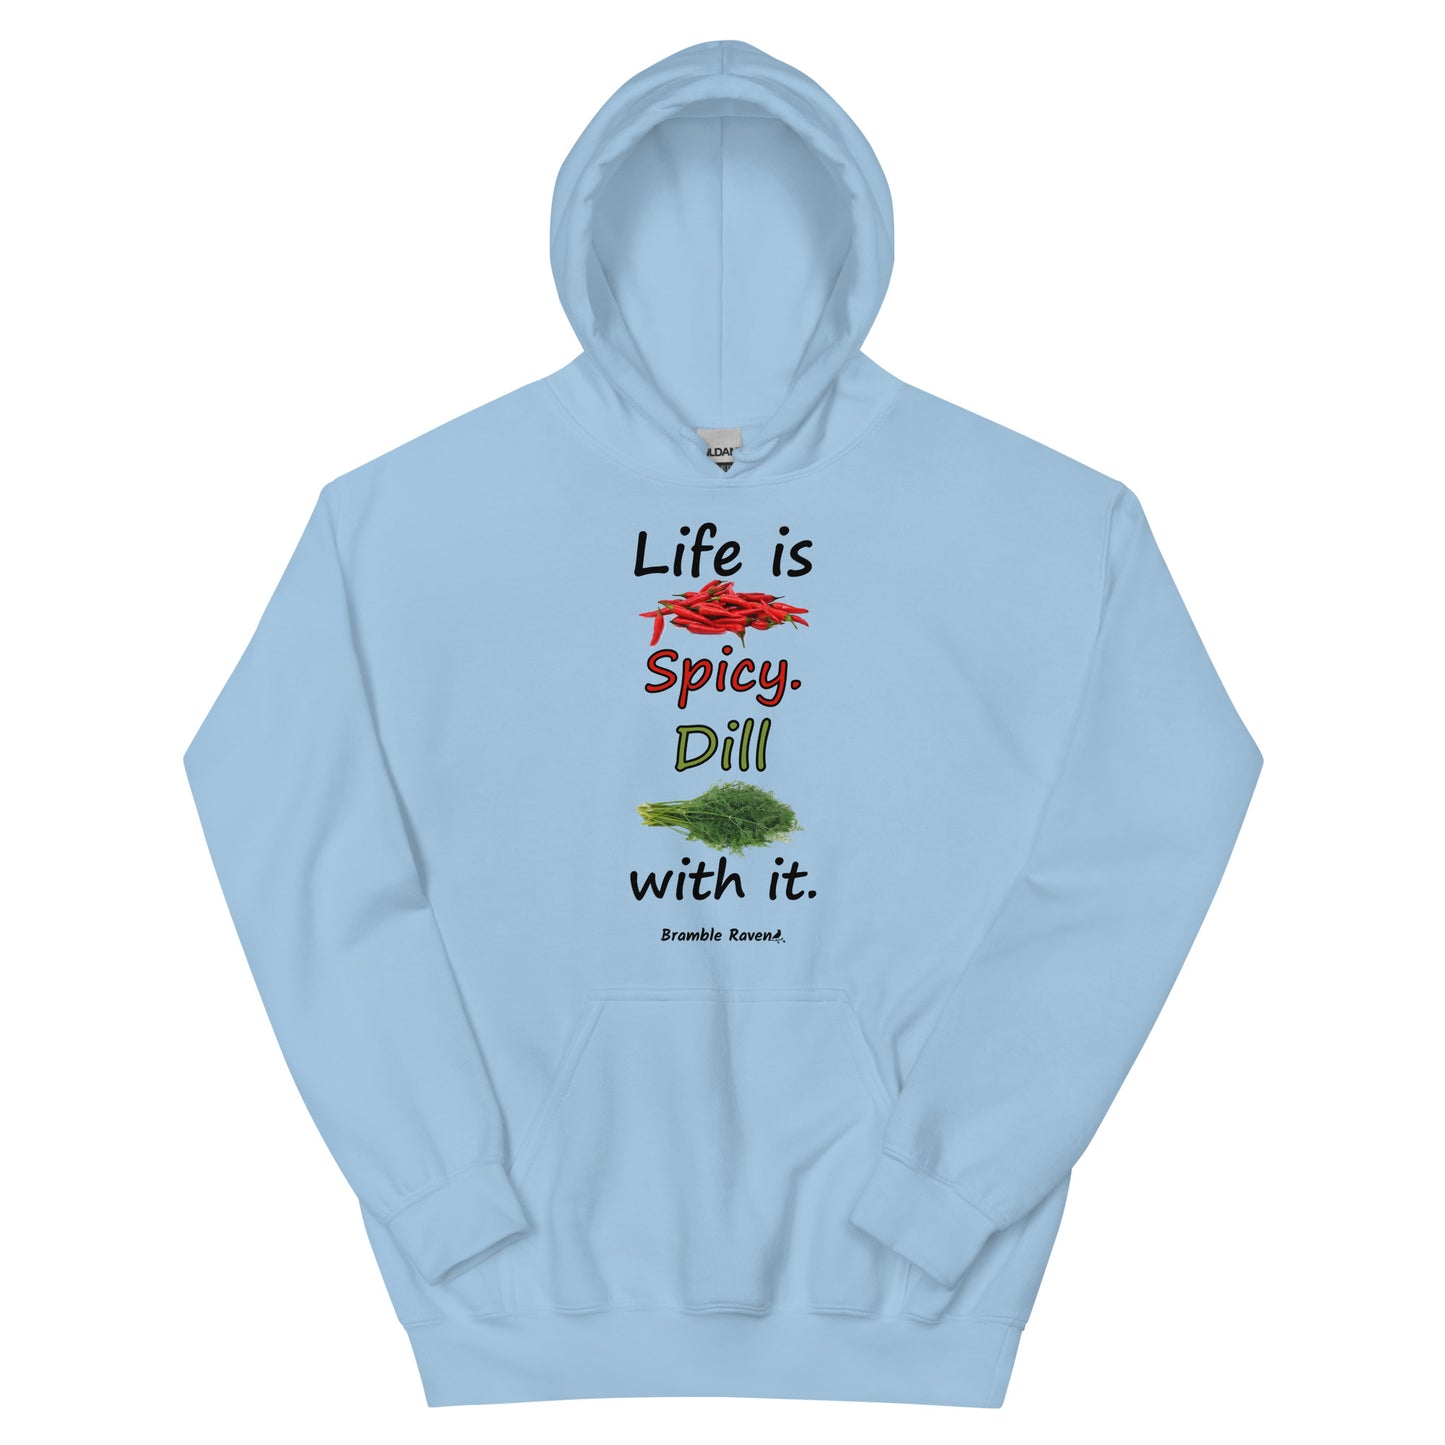 Light blue colored unisex heavy blend hoodie.  Double lined hood, matching drawcord, front pouch pocket. Rib knit cuffs and waistband. Features text and image: Life is spicy. Dill with it. 